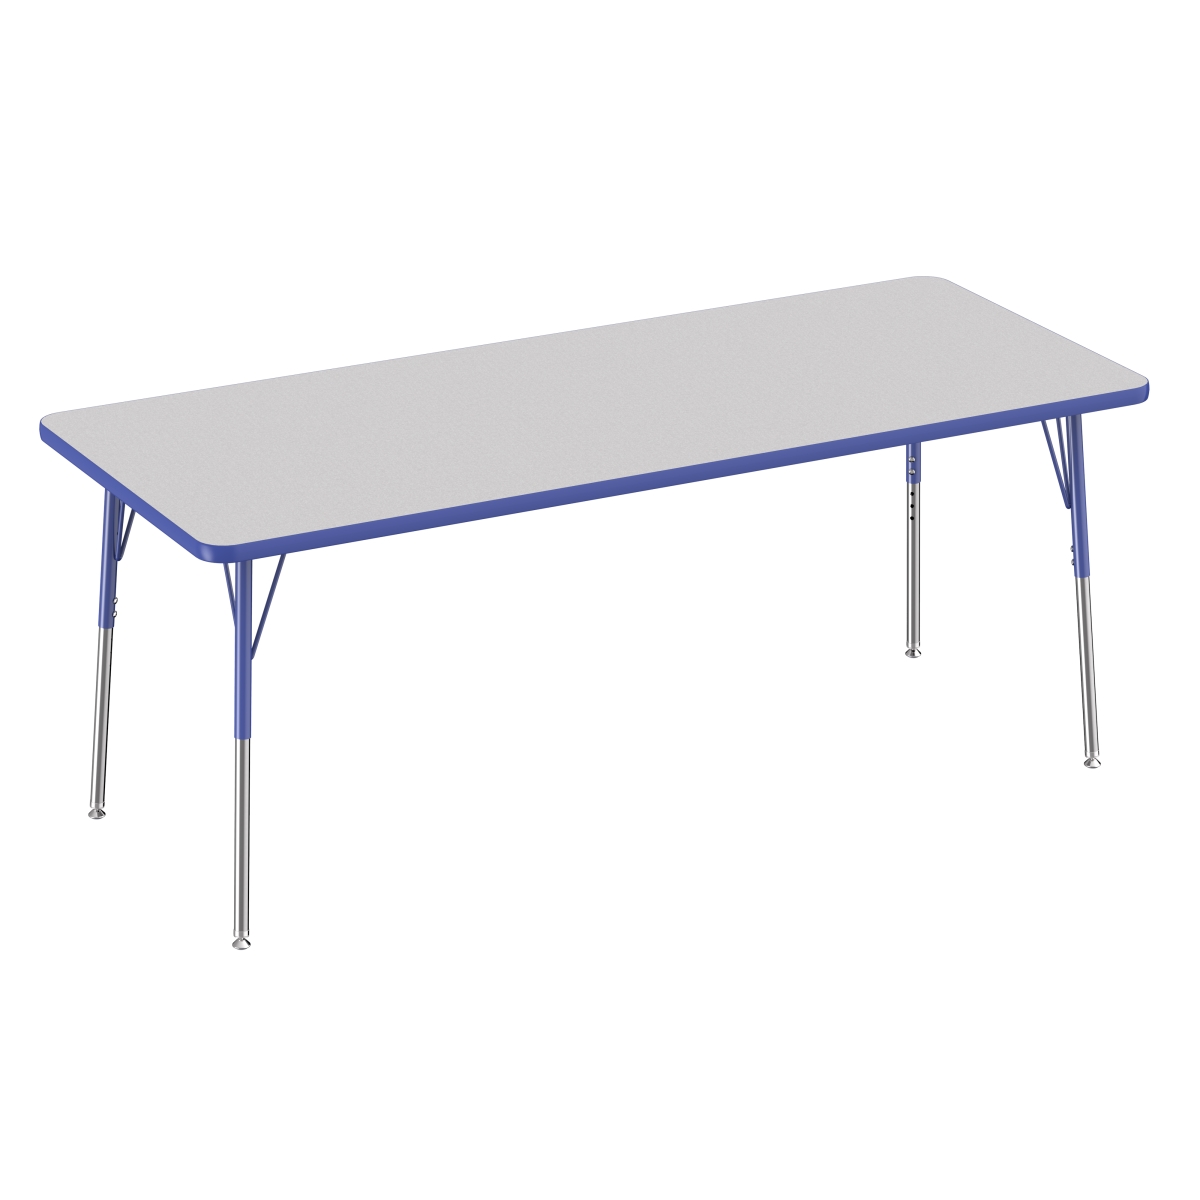 10027-gybl 30 X 72 In. Rectangle T-mold Adjustable Activity Table With Standard Swivel - Grey & Blue